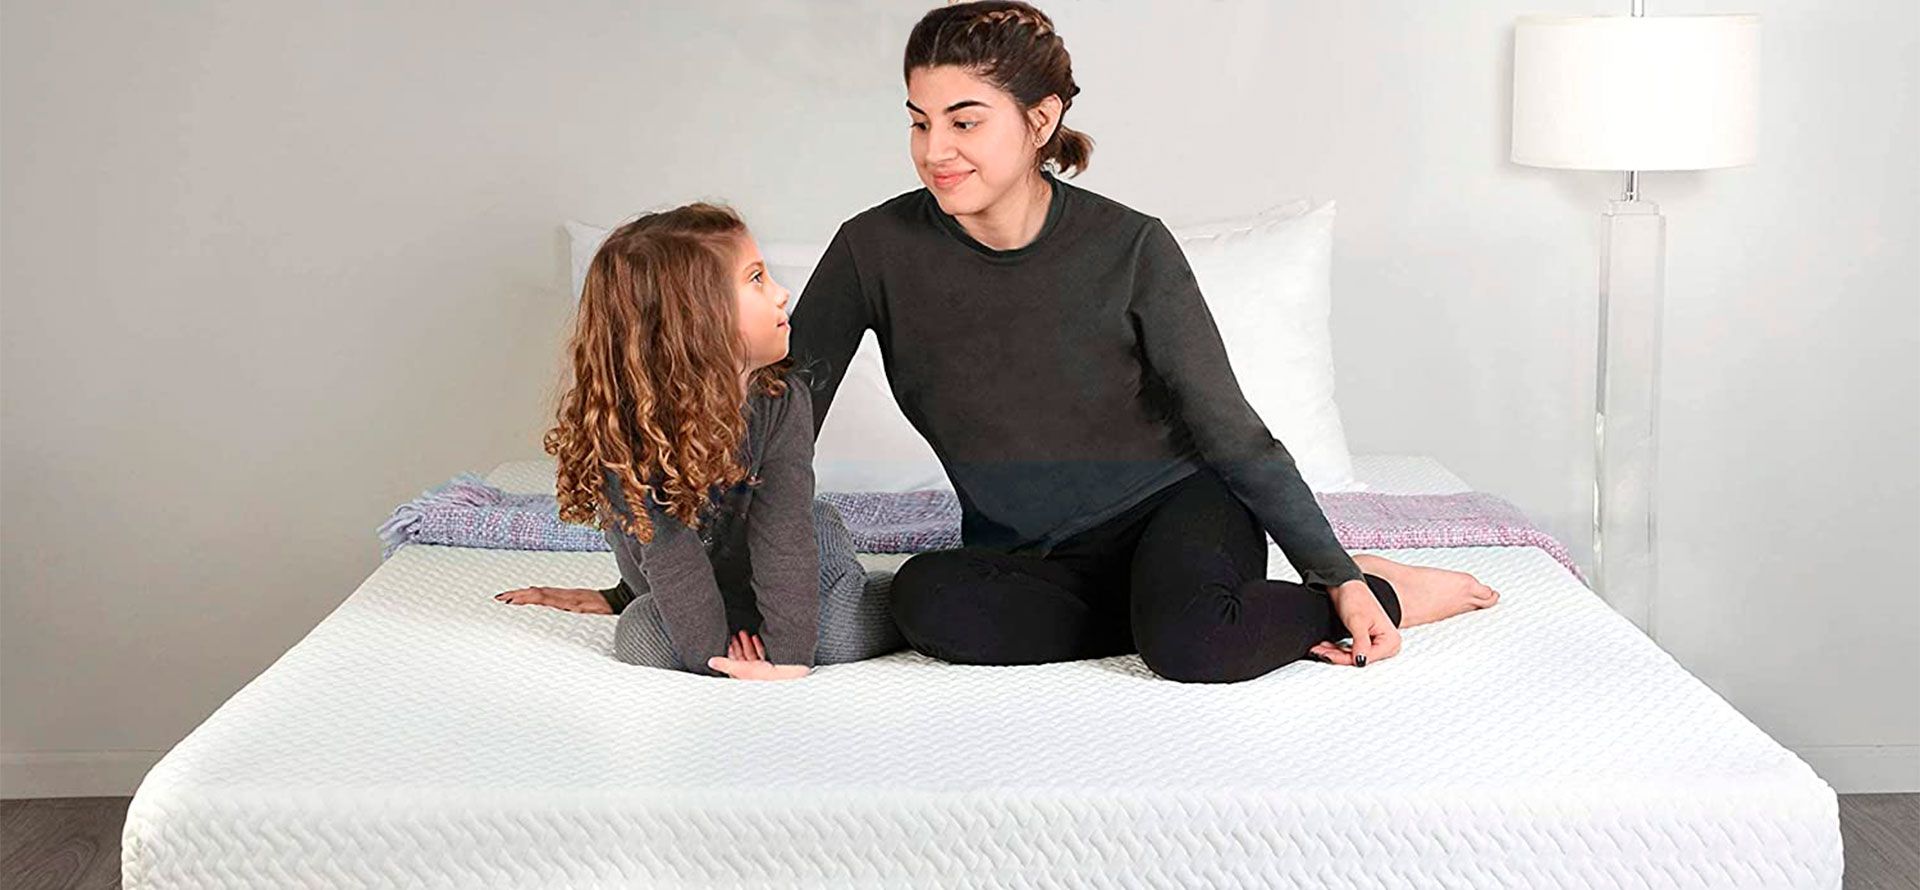 Two sisters sit on a wide mattress.